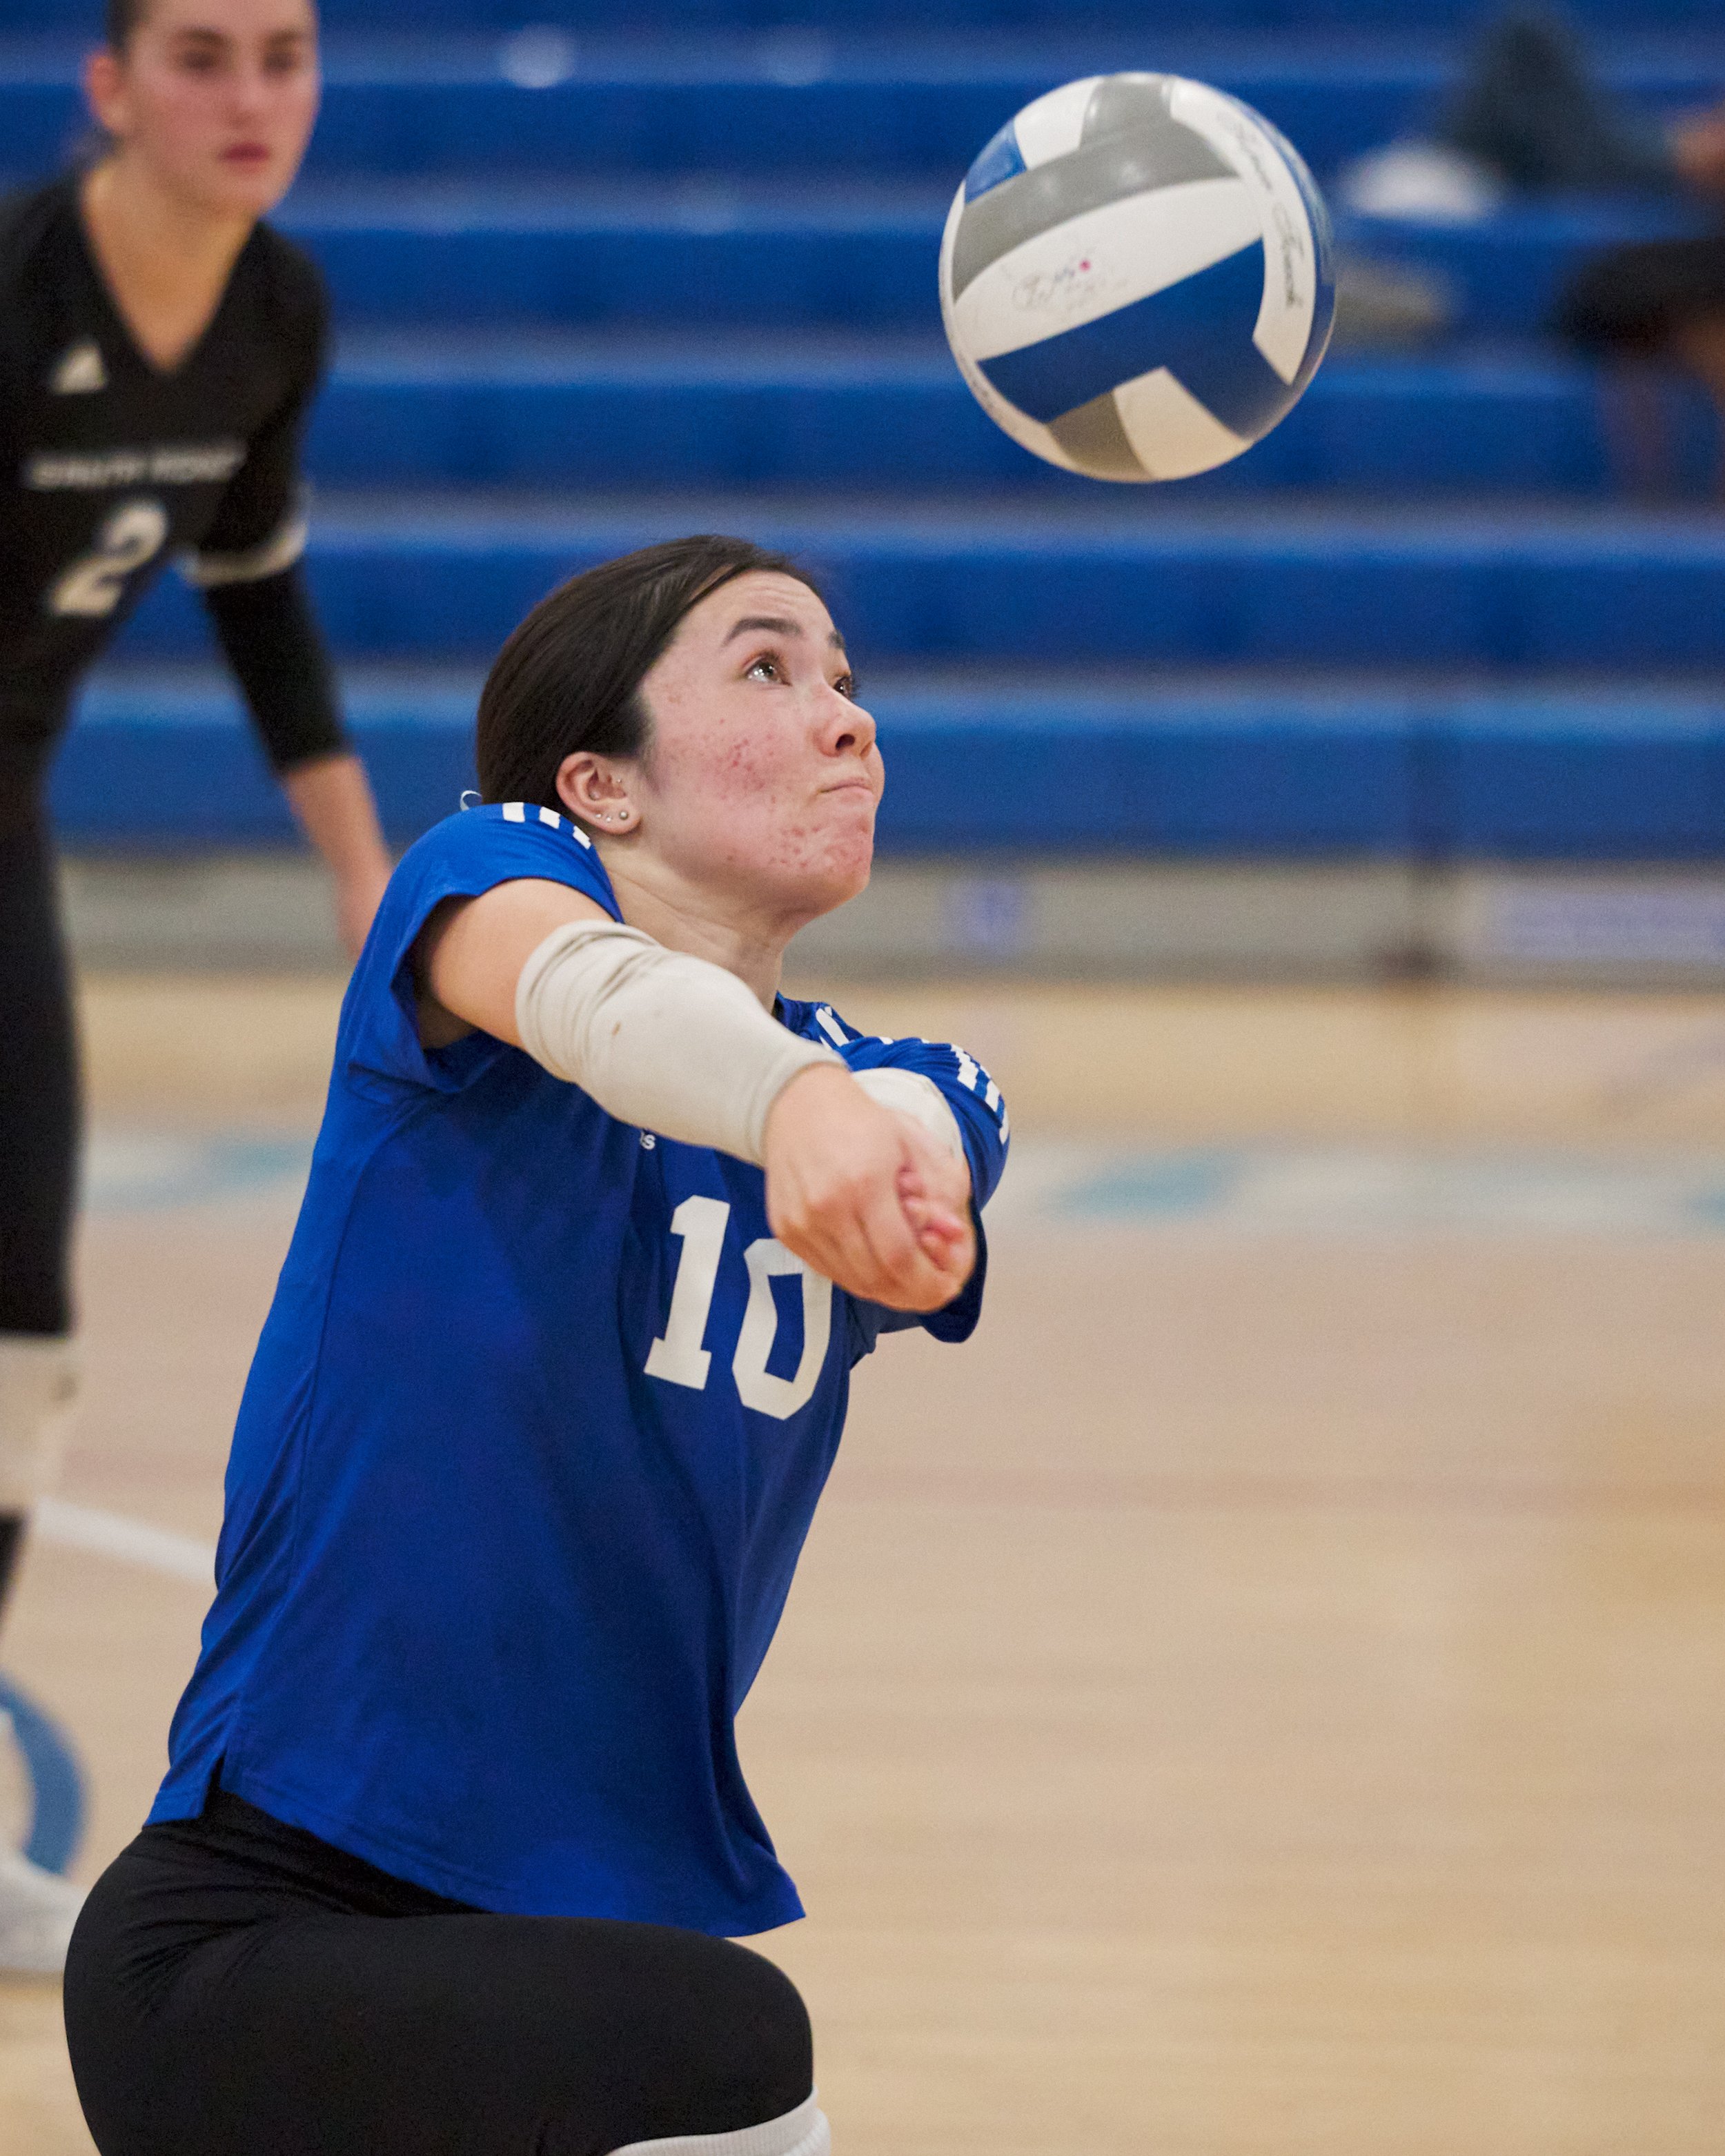  Santa Monica College Corsairs libero Sophia Odle bumps the ball during the women's volleyball match against the Bakersfield College Renegades on Wednesday, Nov. 1, 2023, at Corsair Gym in Santa Monica, Calif. The Corsairs won 3-2. (Nicholas McCall |